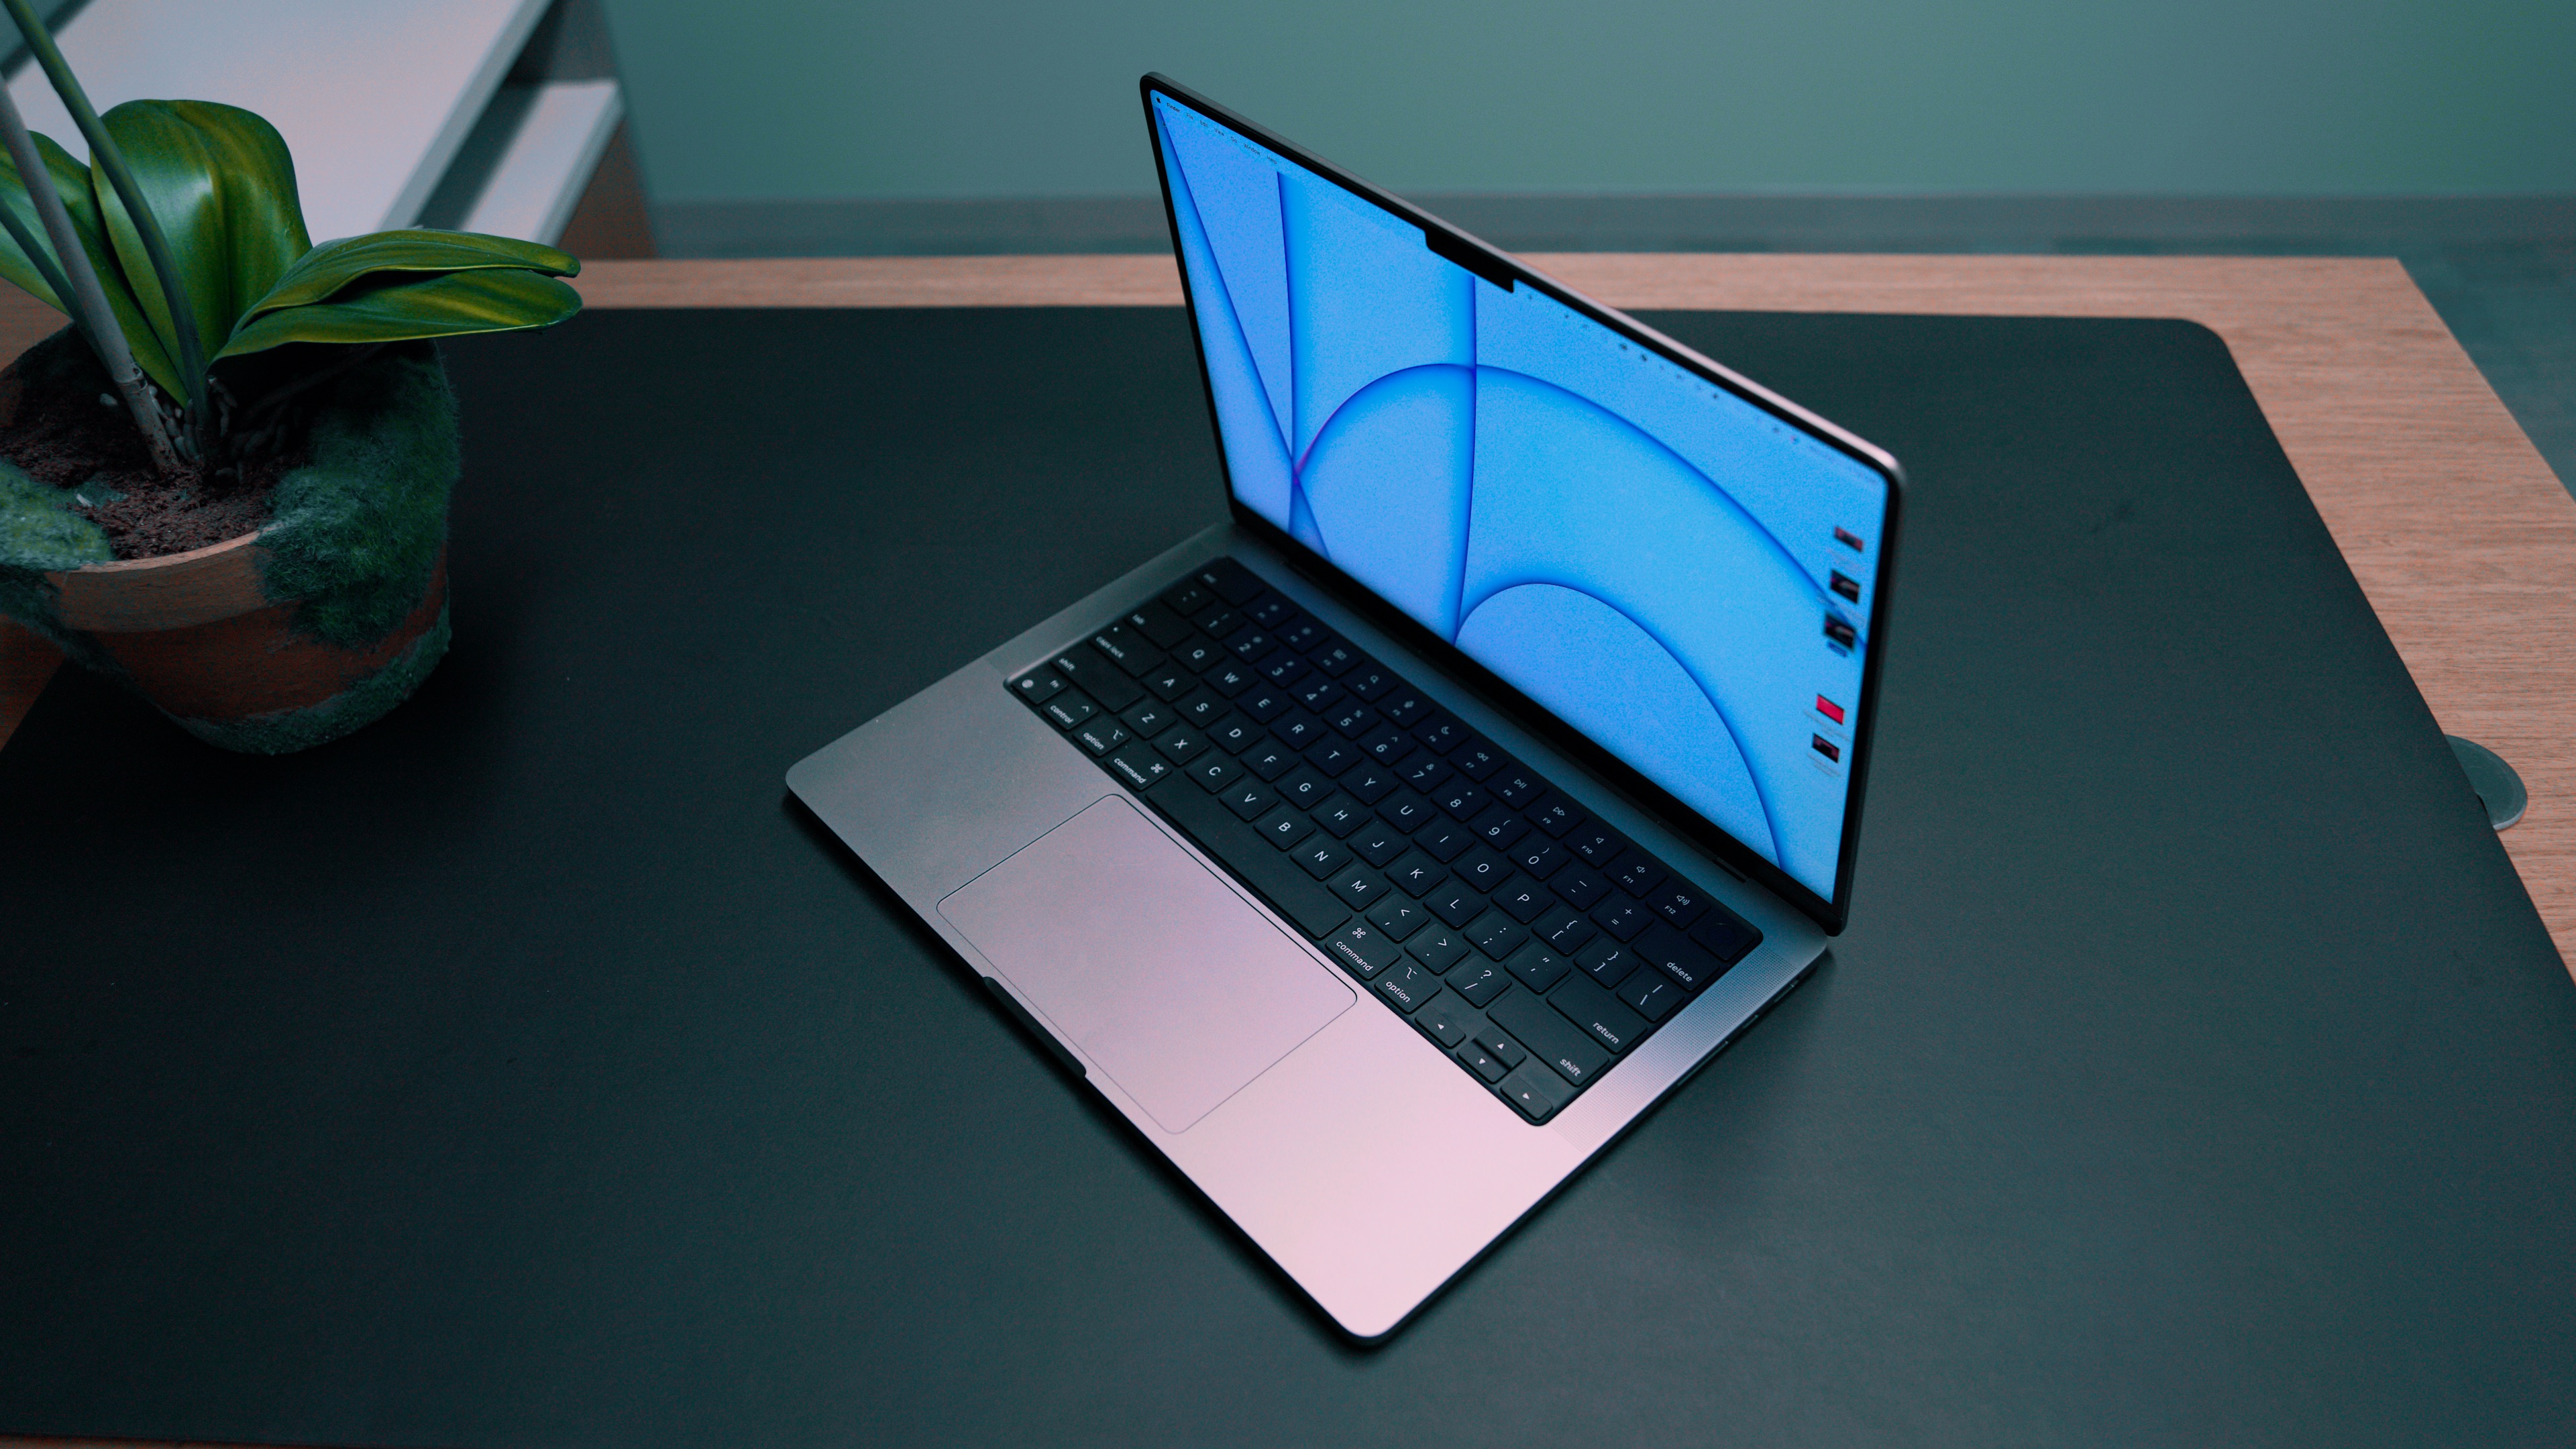 PC/タブレット ノートPC Non-pro look at the entry-level 14-inch MacBook Pro - 9to5Mac